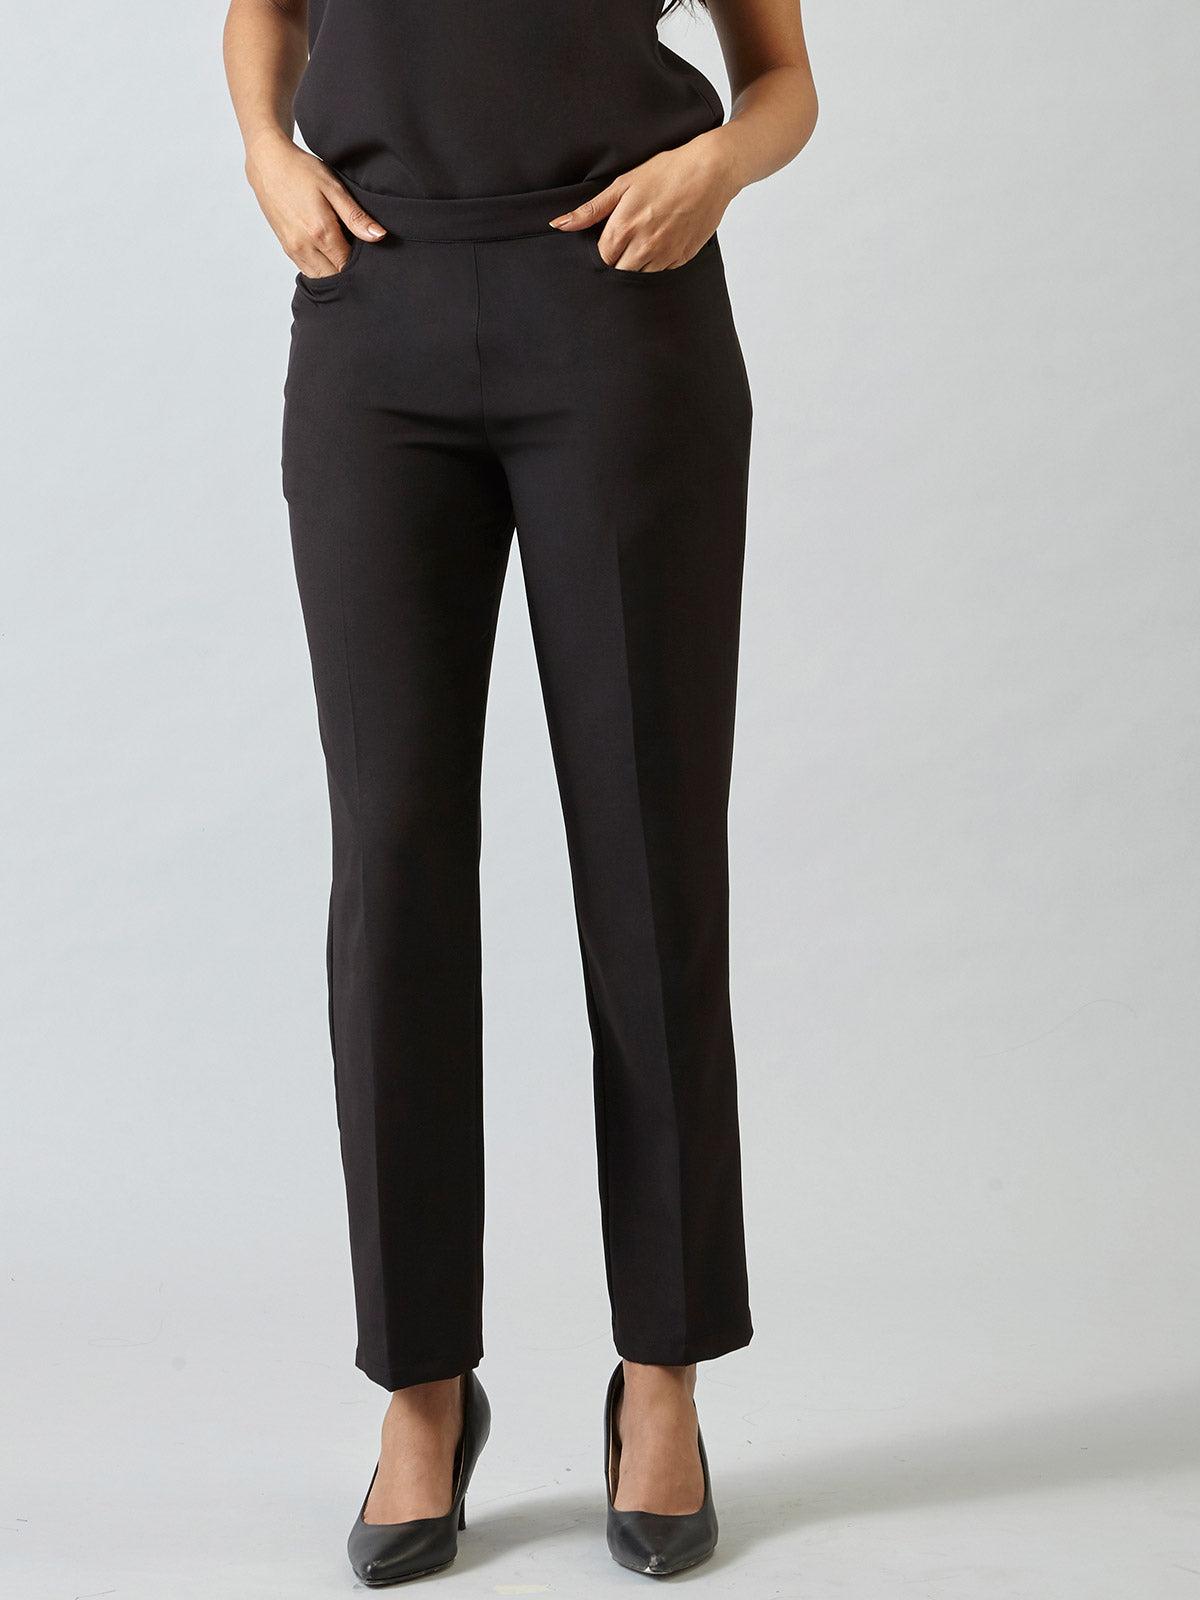 Essential Work Trousers - Black| Formal Trousers